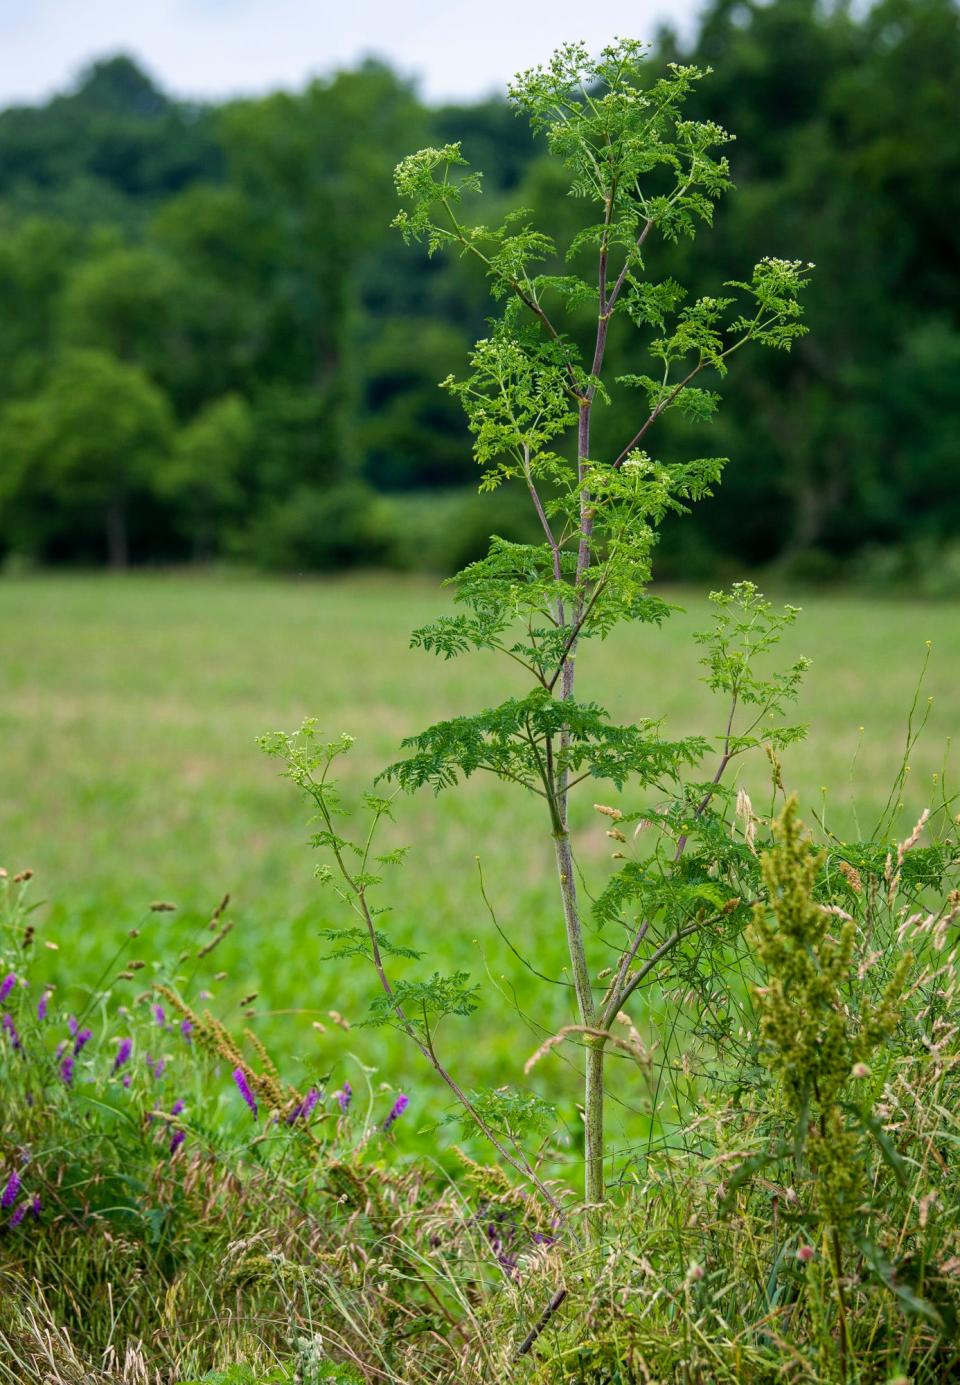 There are several places where people can report finding poison hemlock, an invasive and toxic species, including the Invasive and Exotic Species of North America website.